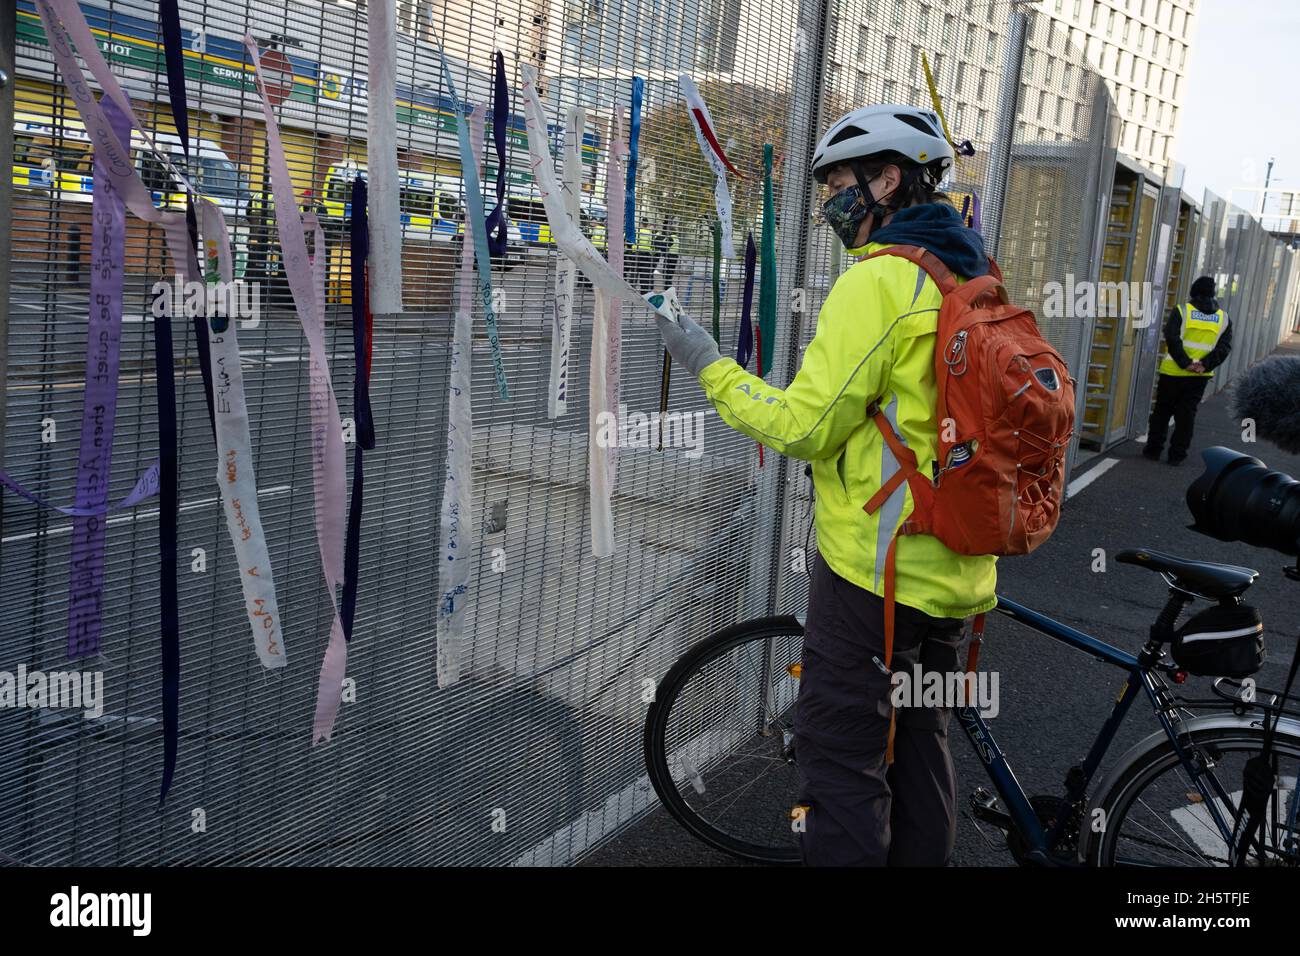 Glasgow, Scotland, UK. Protests at the entrance to the UN Climate Change Conference COP26 venue, in Glasgow, Scotland, on 11th November 2021. Photo: Jeremy Sutton-Hibbert/ Alamy Live News. Stock Photo